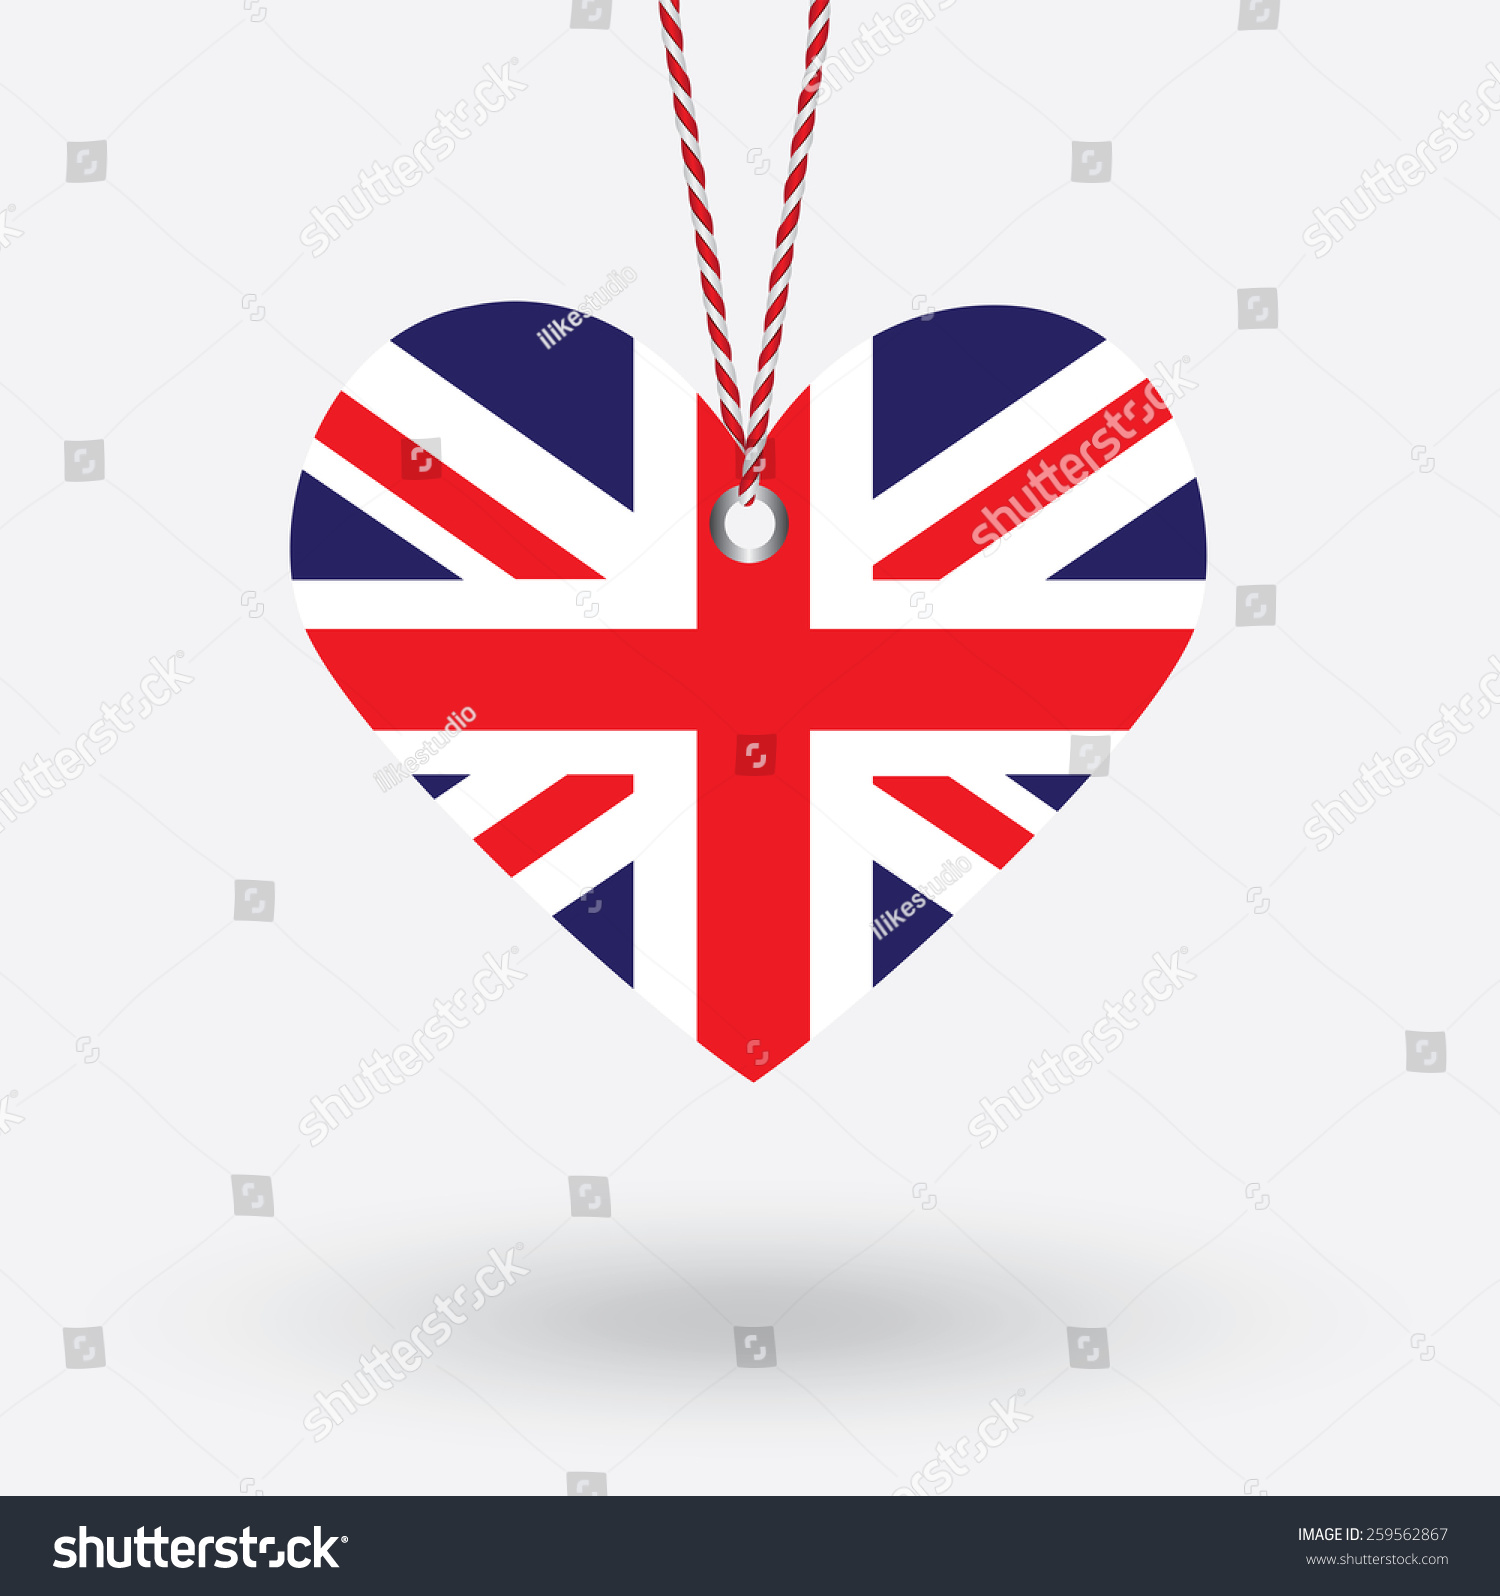 SVG of United Kingdom flag in the shape of a heart with hang tags svg